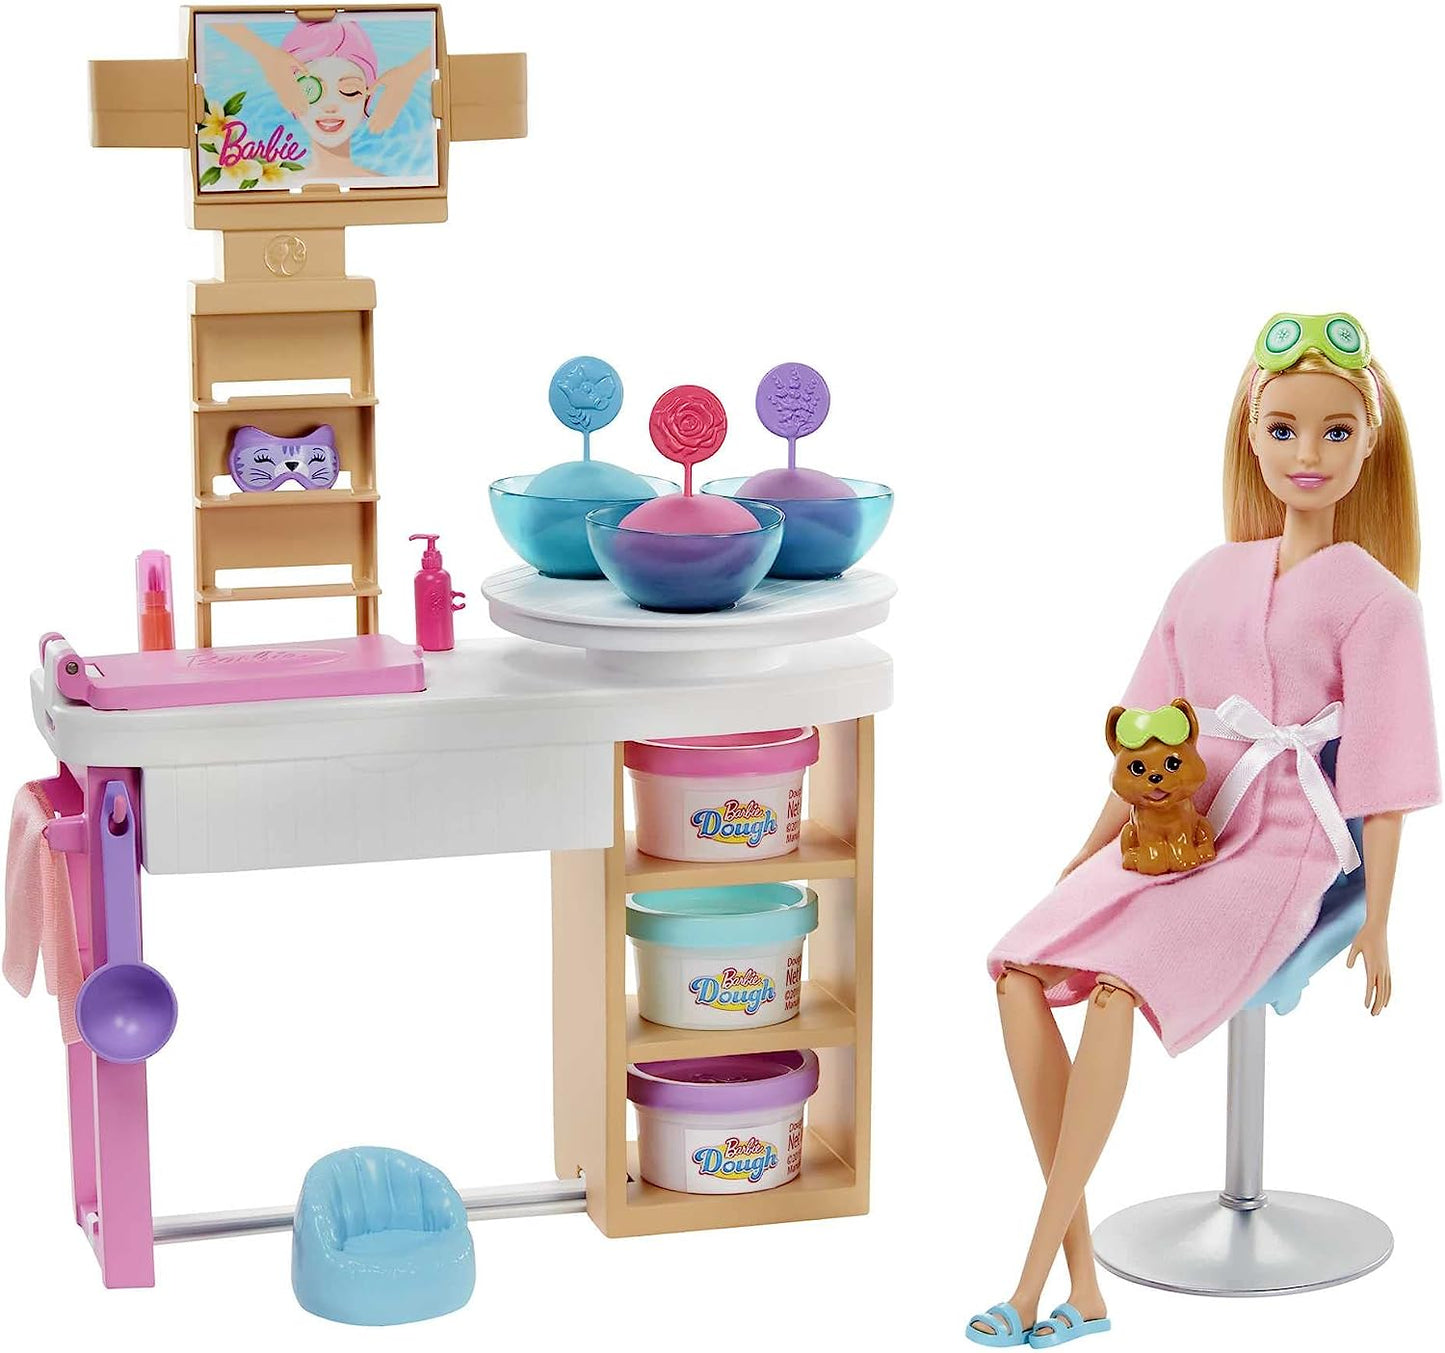 Barbie - Face Mask Spa Day Playset GJR84